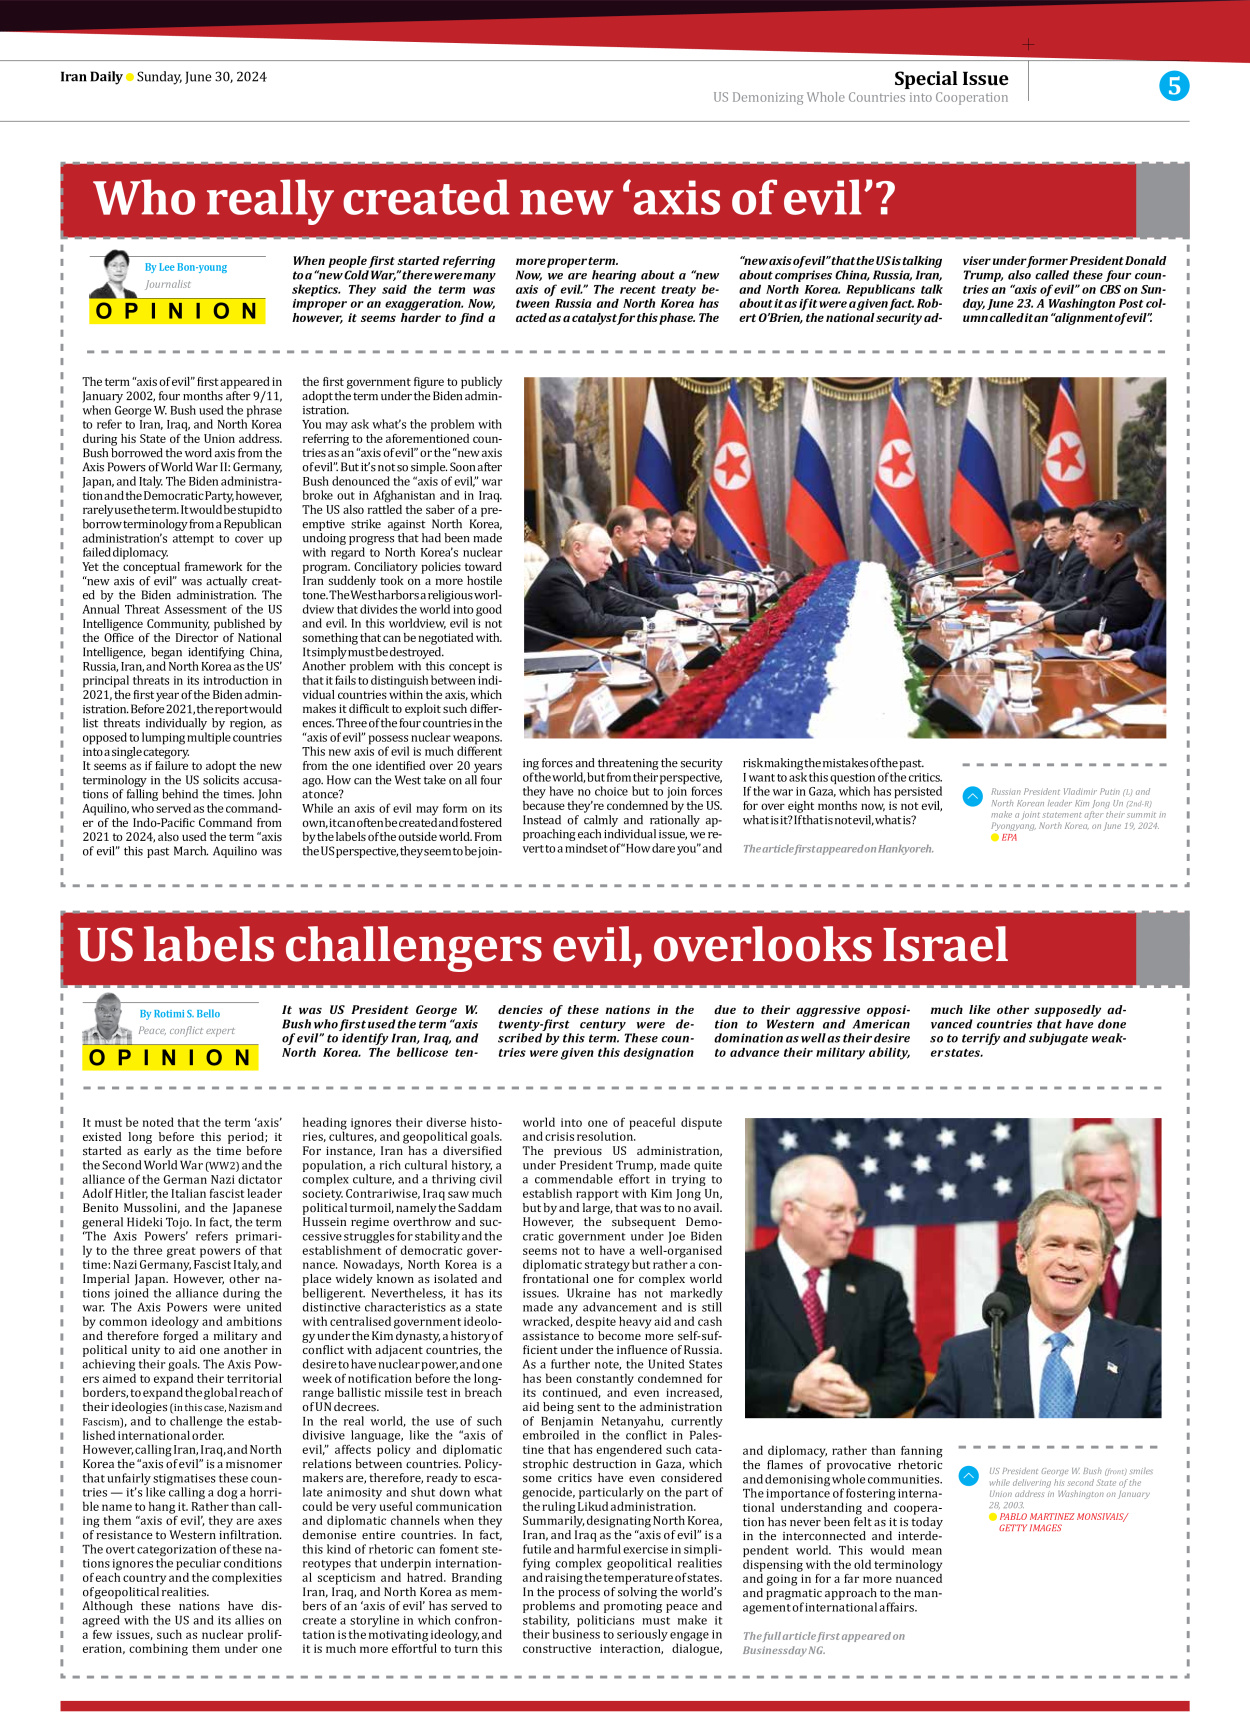 Iran Daily - Number Seven Thousand Five Hundred and Ninety Two - 30 June 2024 - Page 5